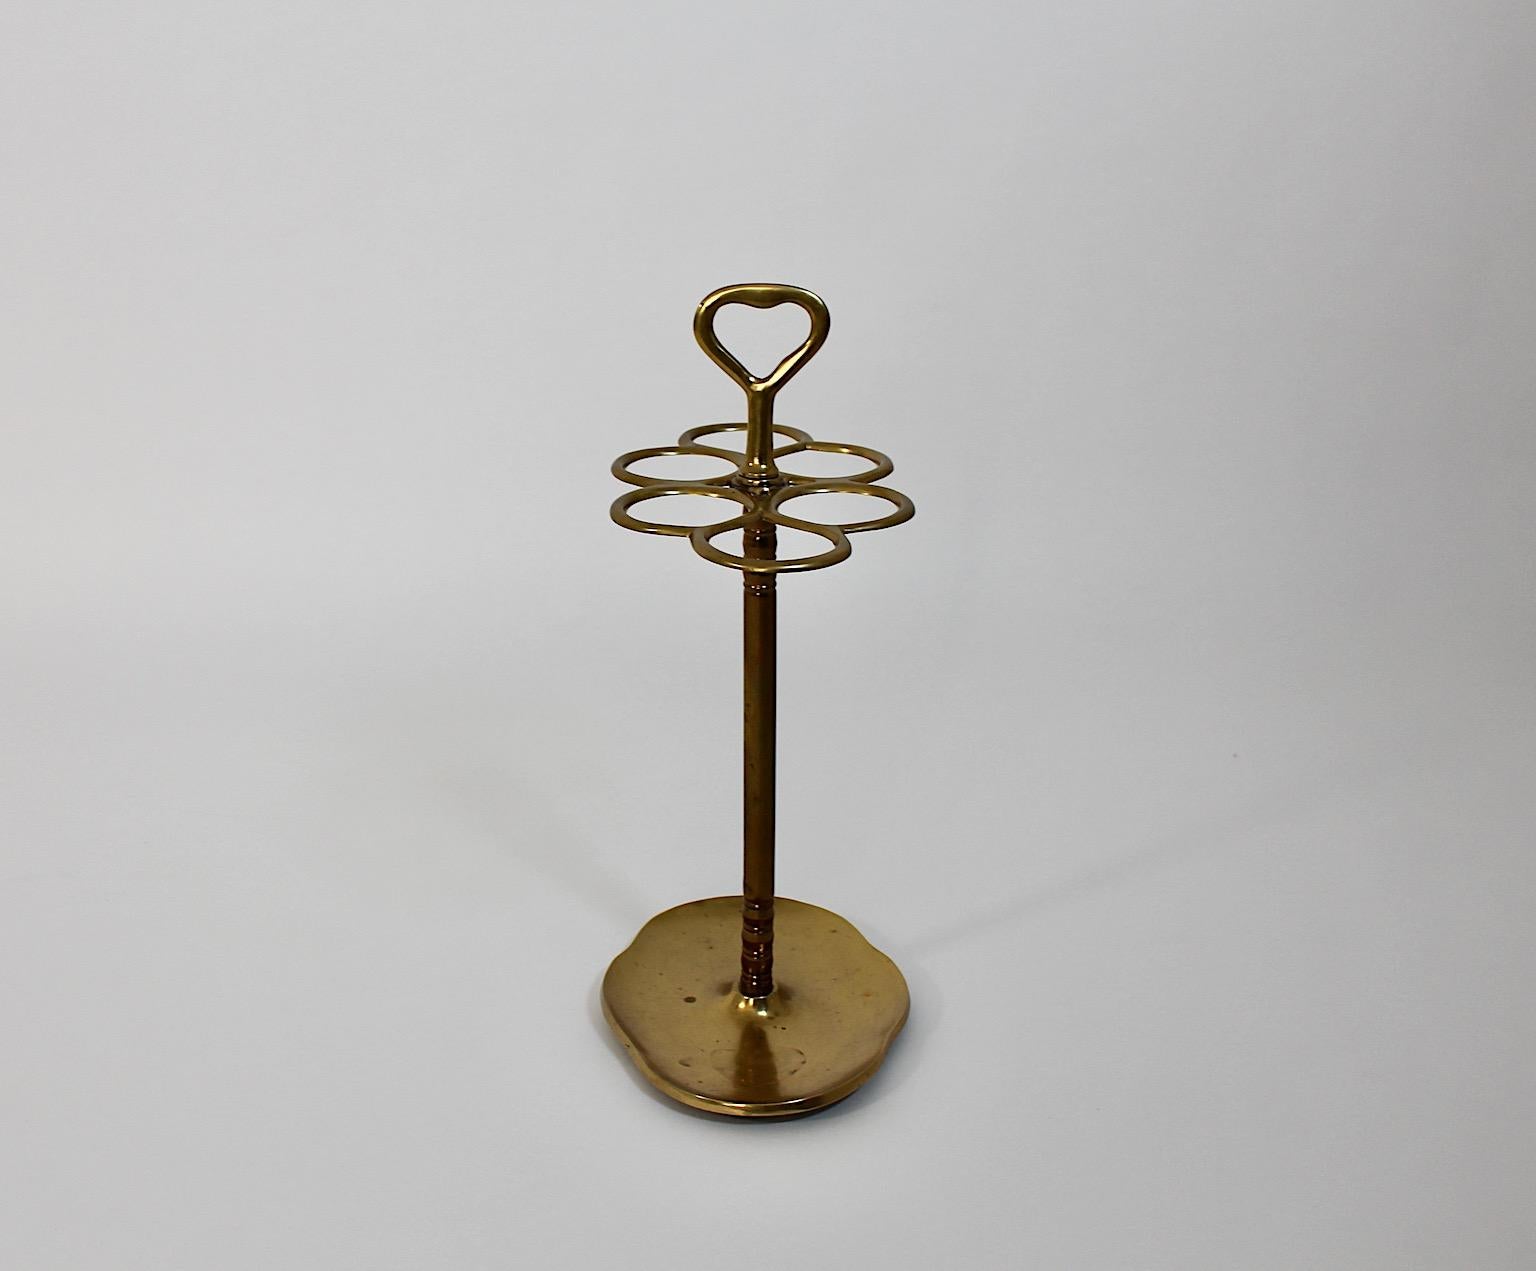 Hollywood Regency Style Vintage Brass Umbrella Stand Cane Holder 1970s Italy For Sale 4